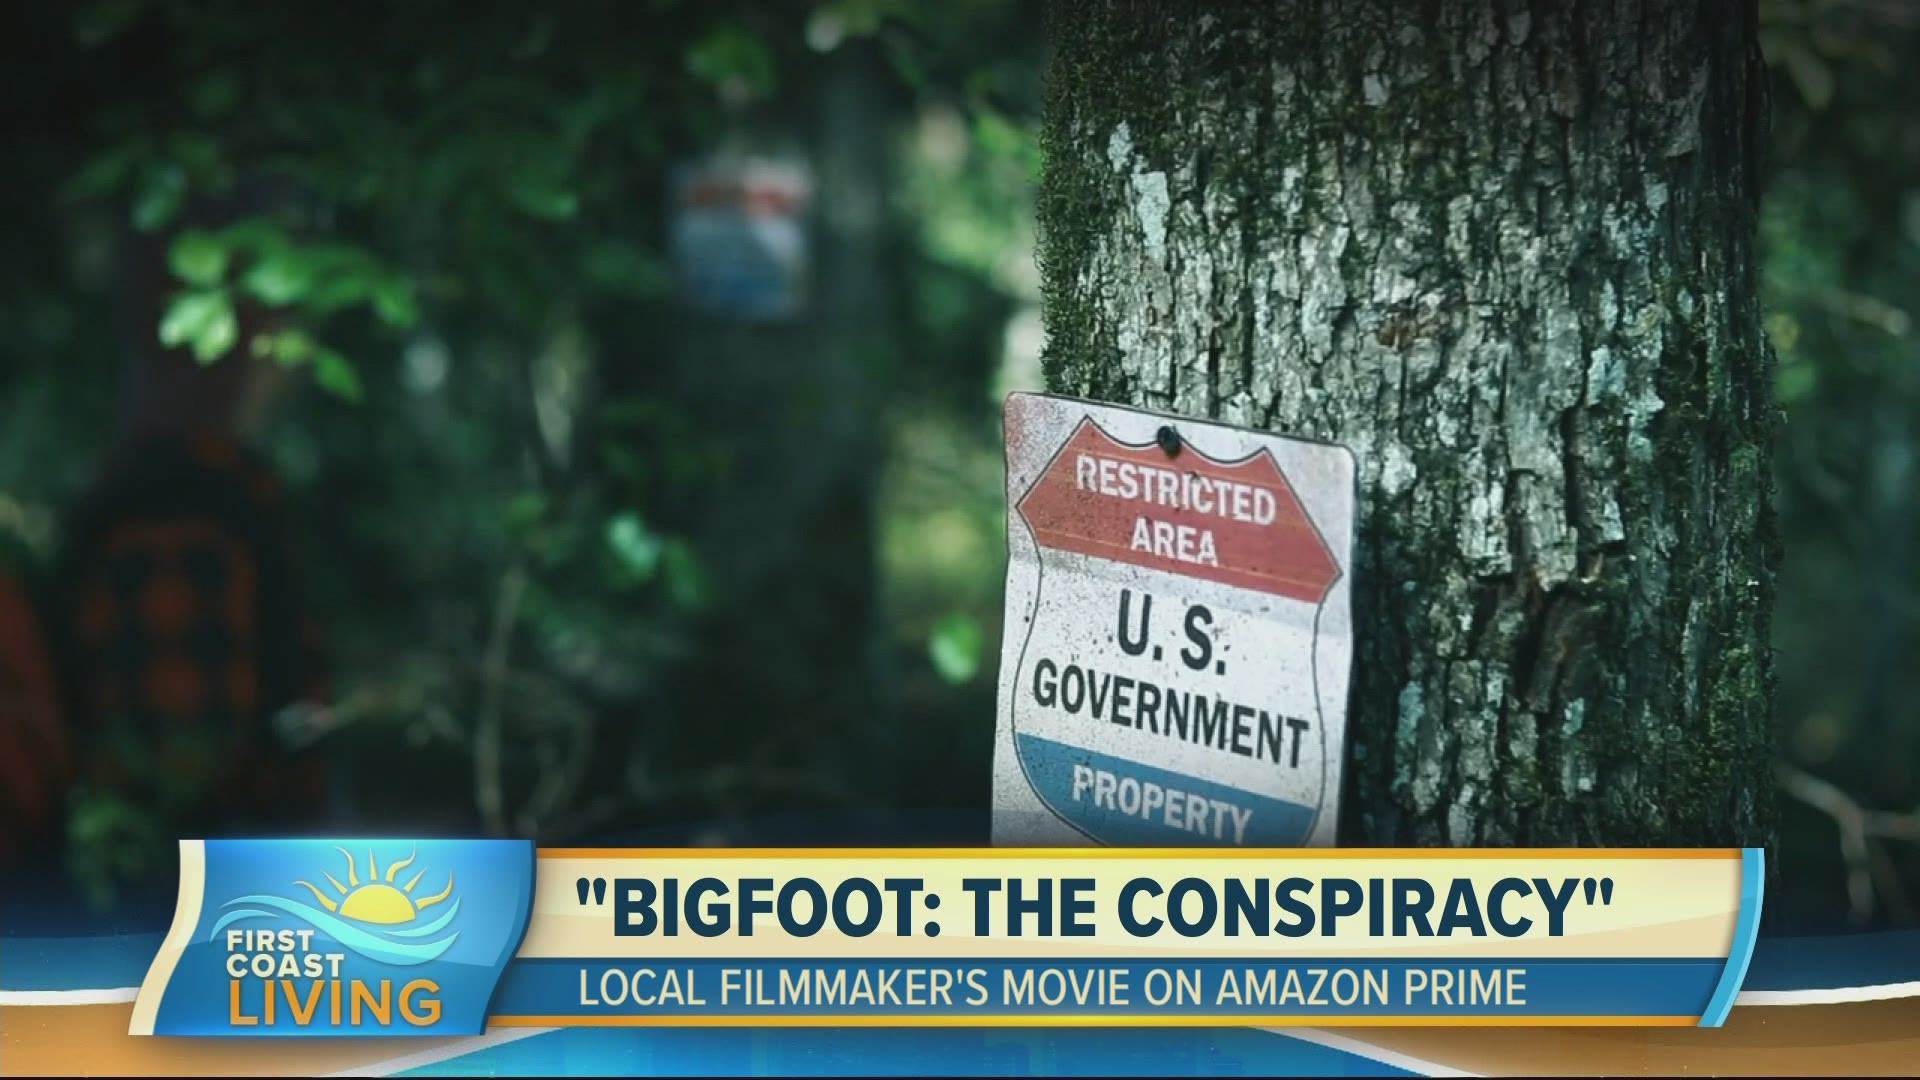 “Bigfoot: The Conspiracy” streaming on Amazon Prime.